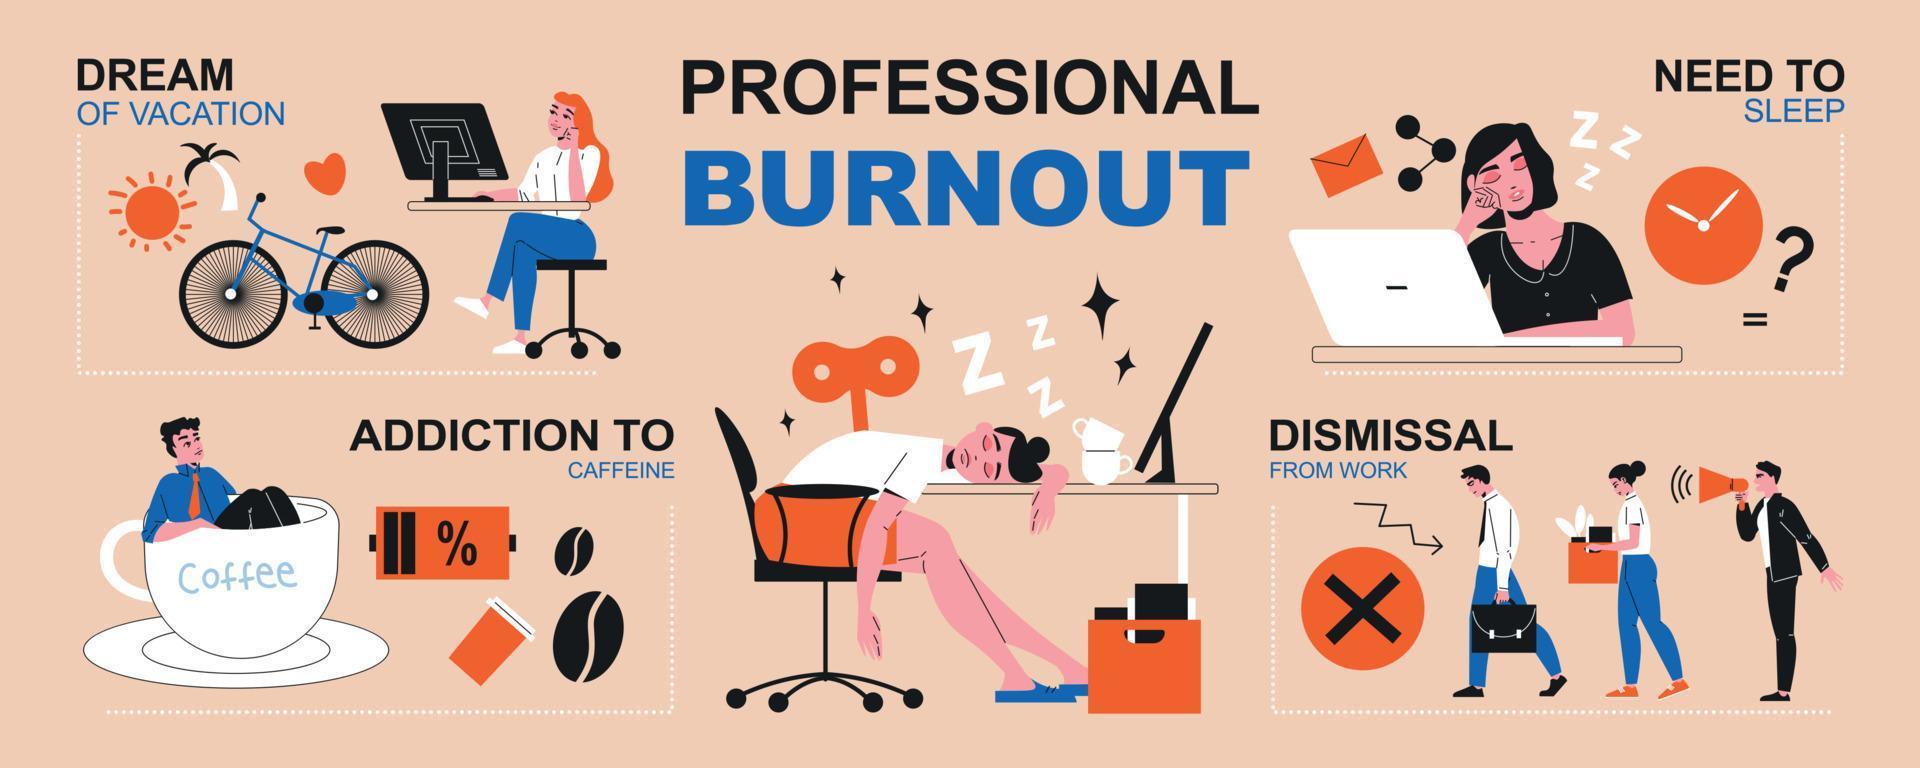 Professional Burnout Syndrome Flat Composition vector